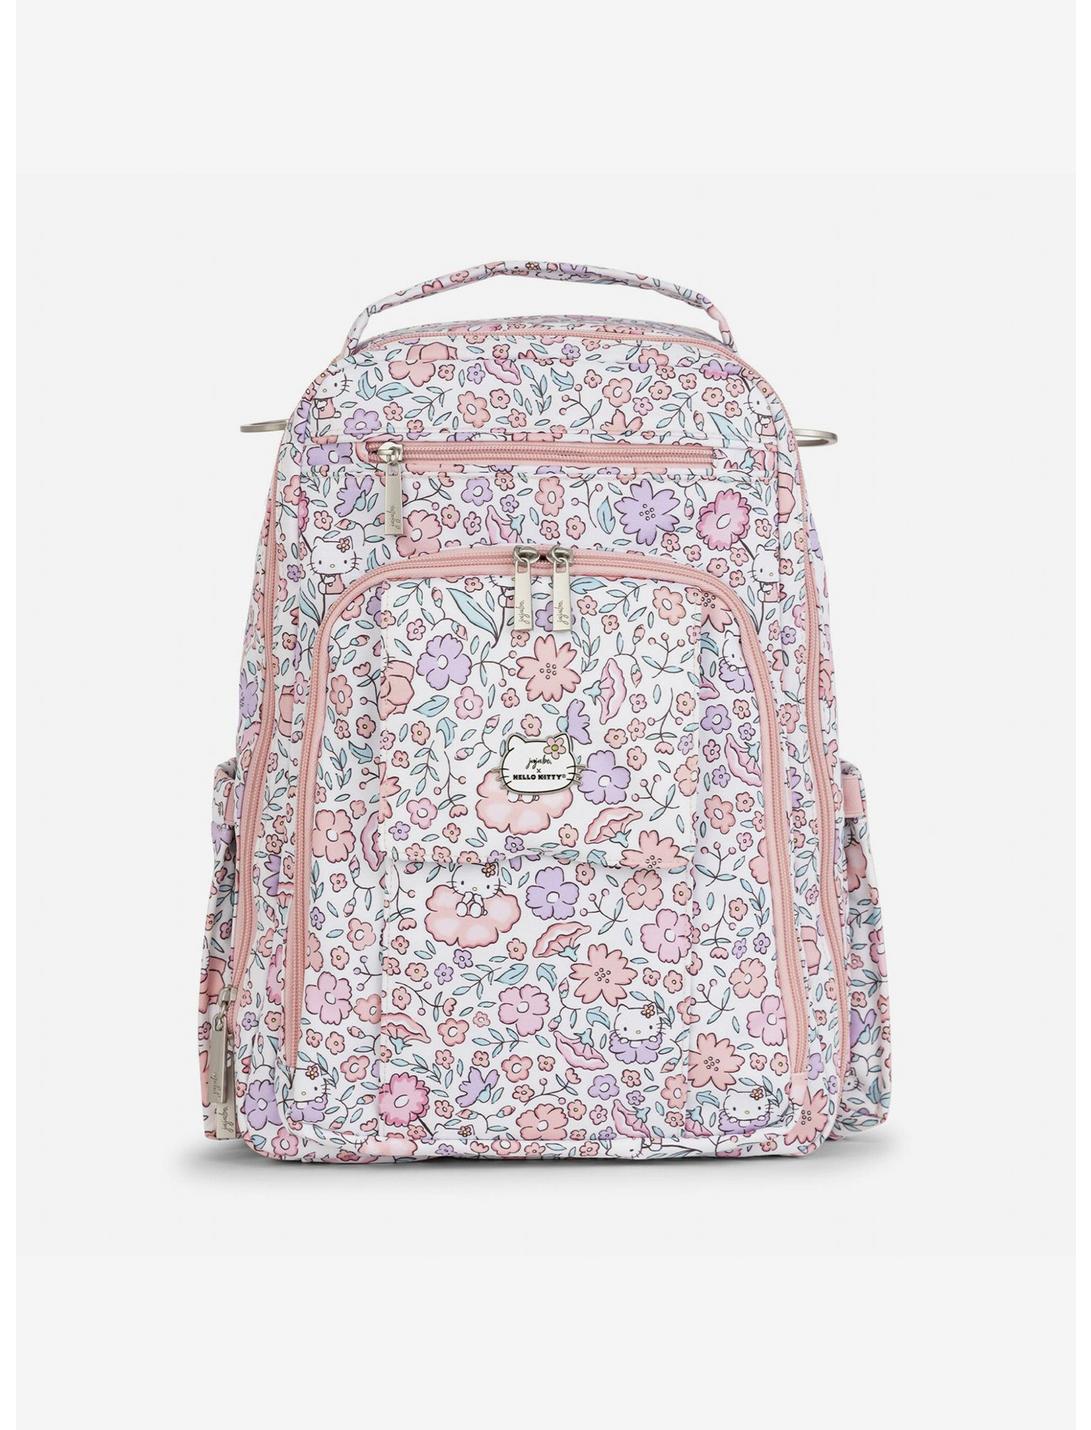 JuJuBe Be Right Back Hello Kitty Floral Backpack, , hi-res